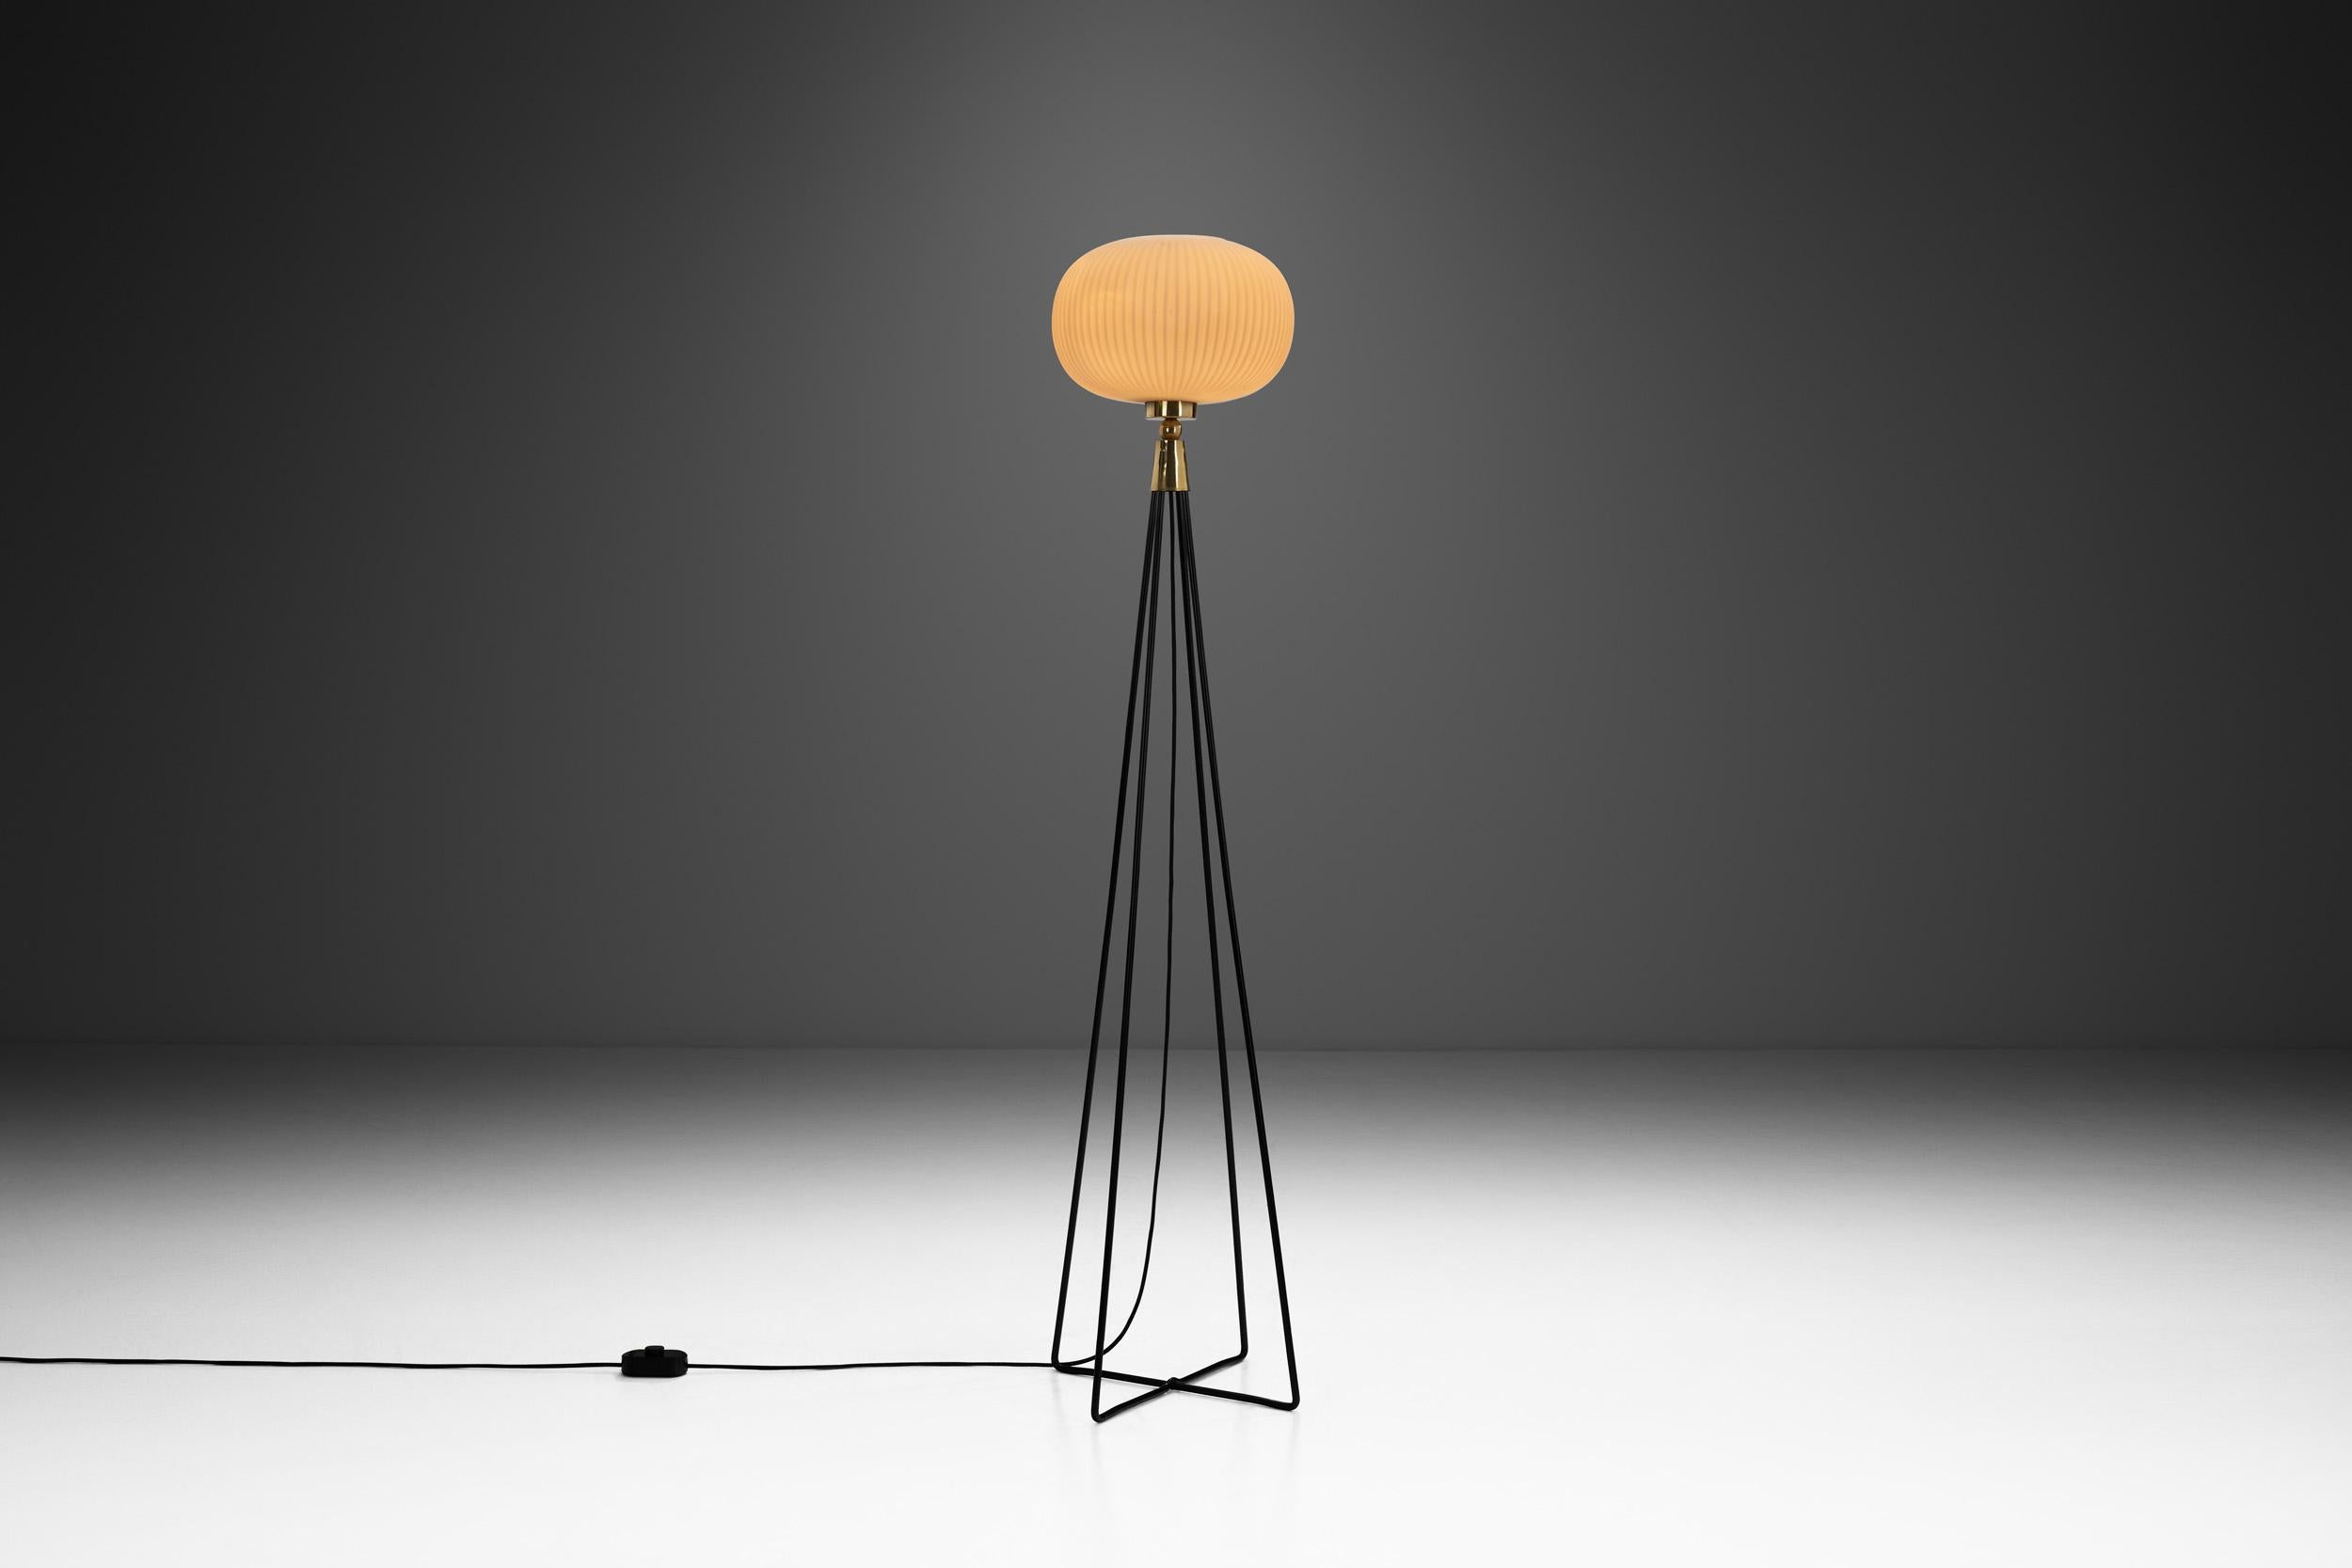 At its most basic level, mid-century modern designs are known for juxtaposing sleek lines with organic shapes, using new materials and methods to reimagine traditional pieces. This floor lamp is a perfect example with a futuristic look that is an